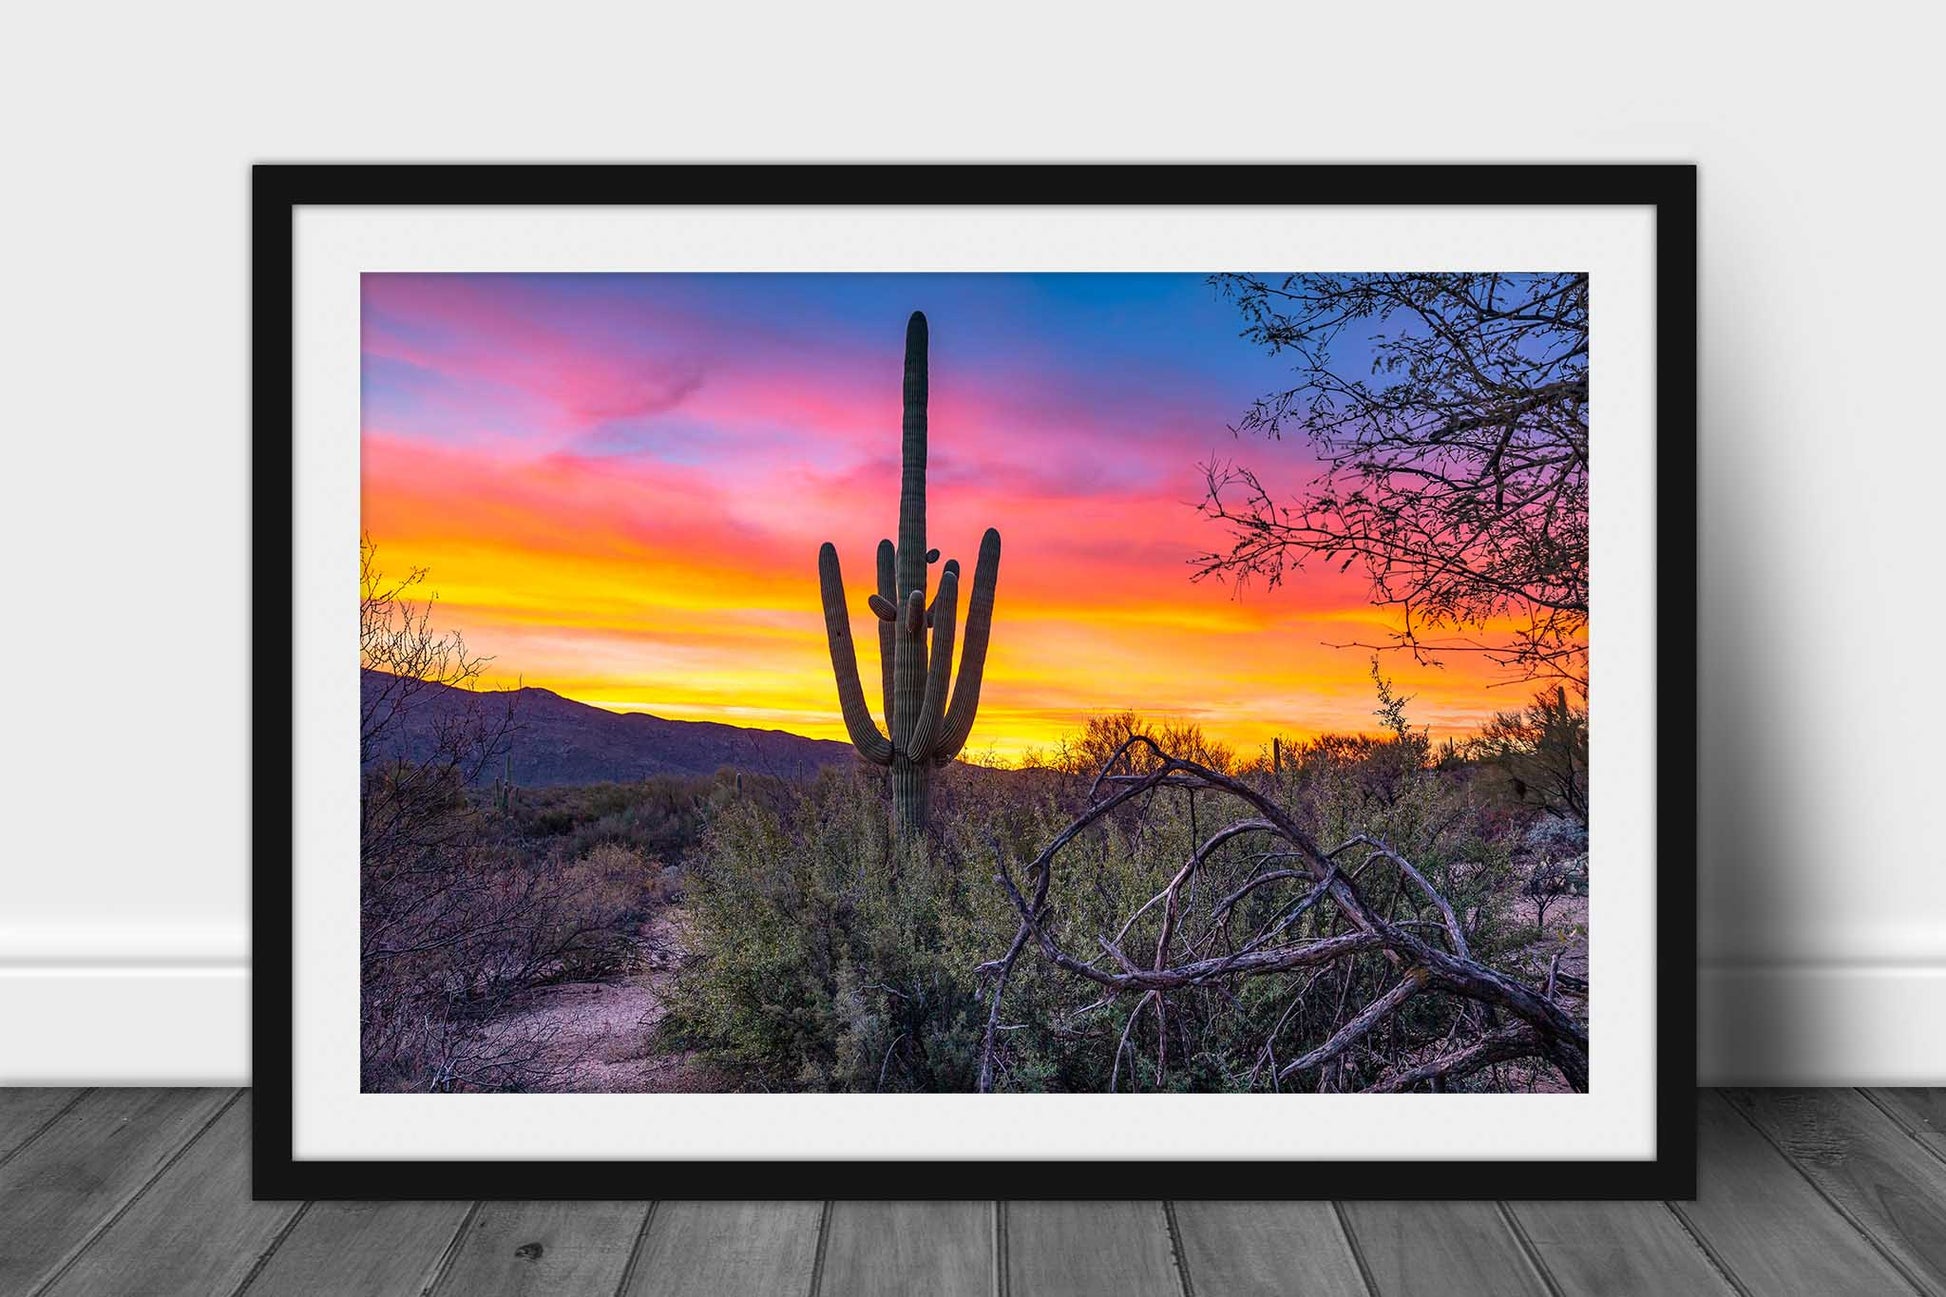 Framed western print of a large saguaro standing tall against a vivid sky at sunrise in the Sonoran Desert near Tucson, Arizona by Sean Ramsey of Southern Plains Photography.